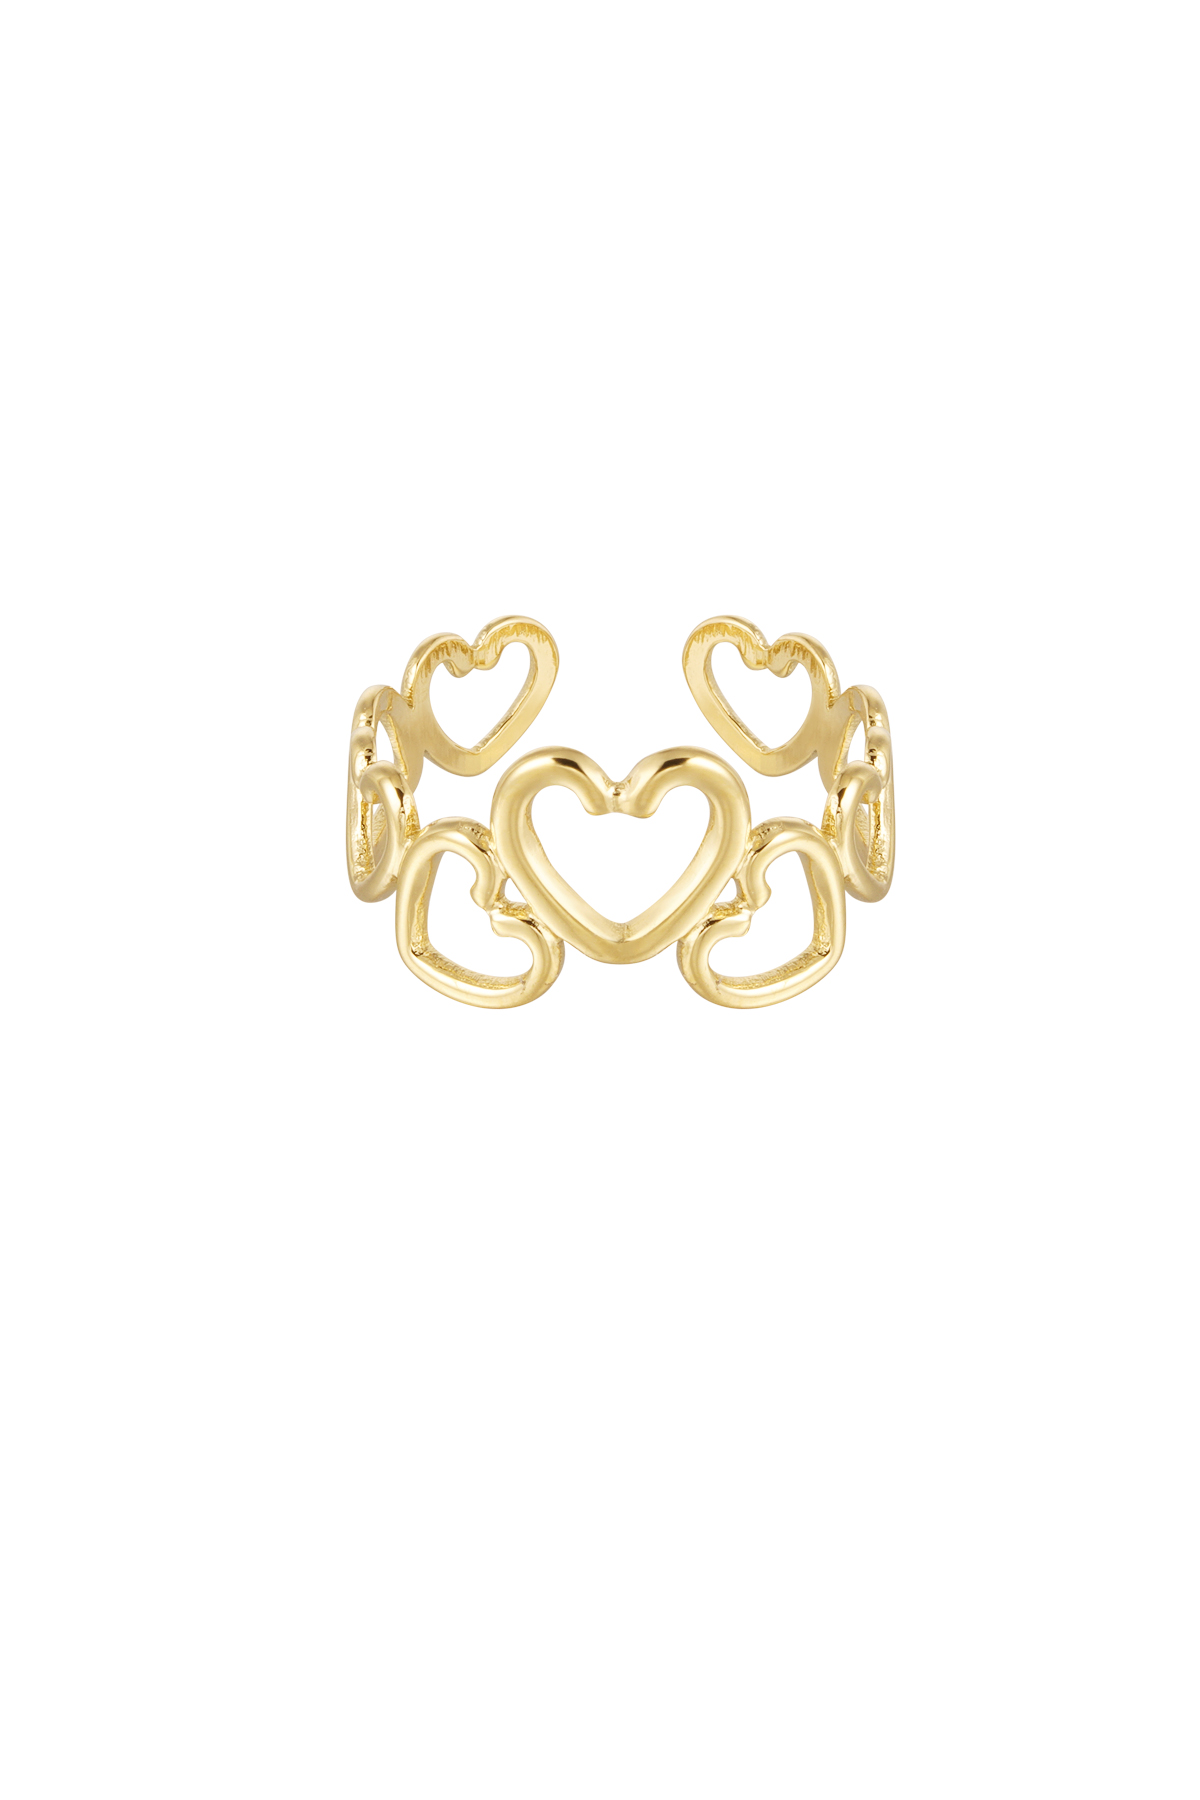 Ring hearts - gold